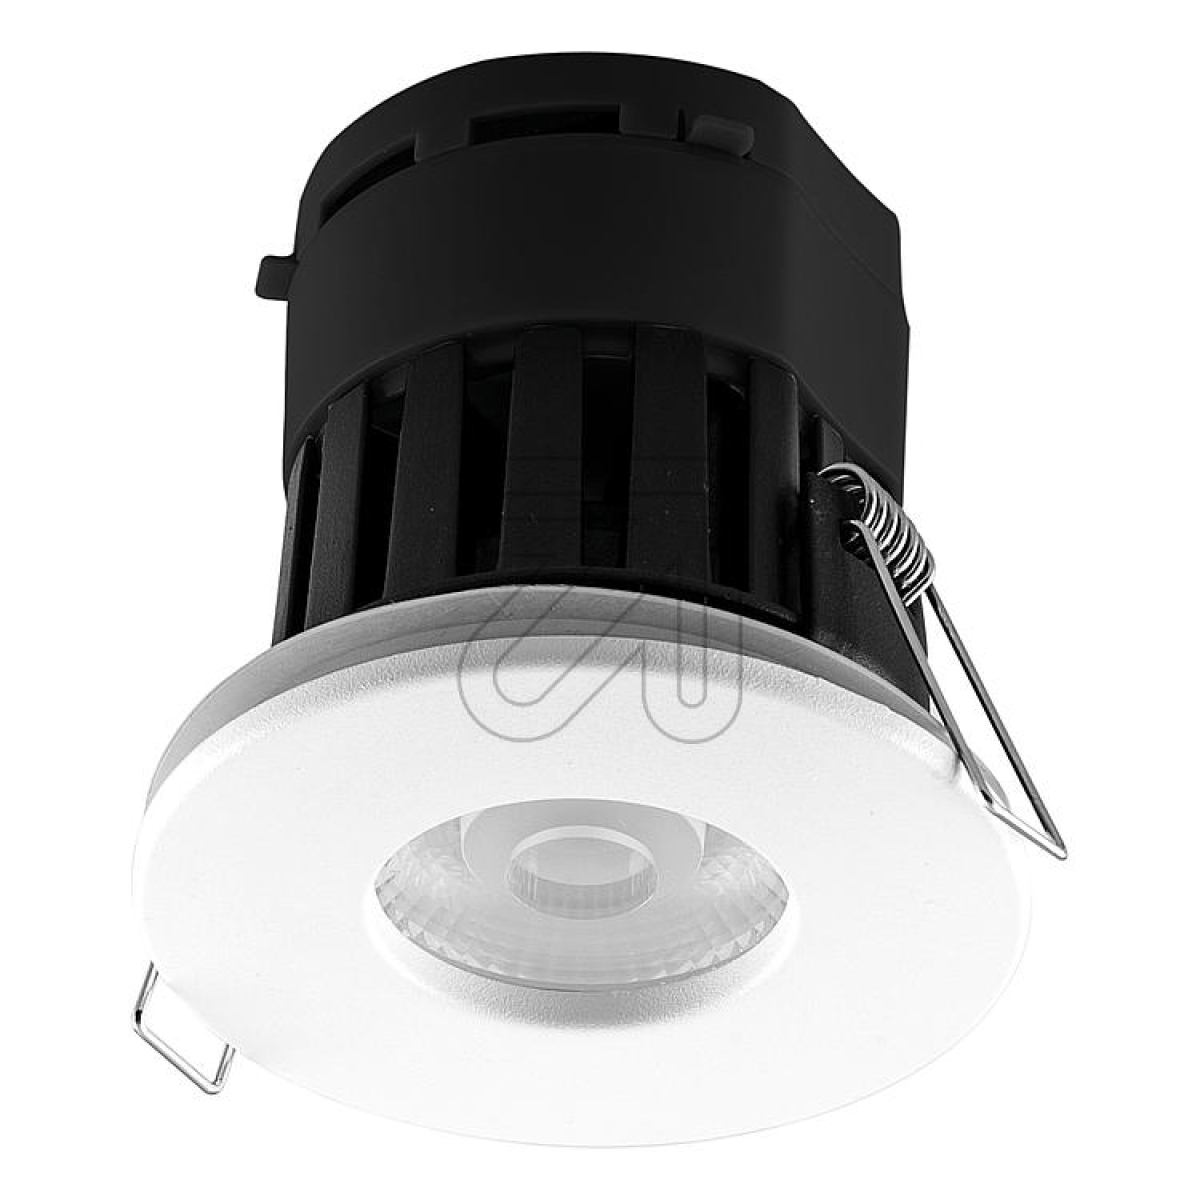 EVNLED recessed spotlight round white 3000/4000K 7W IP65 P65070125Article-No: 670520